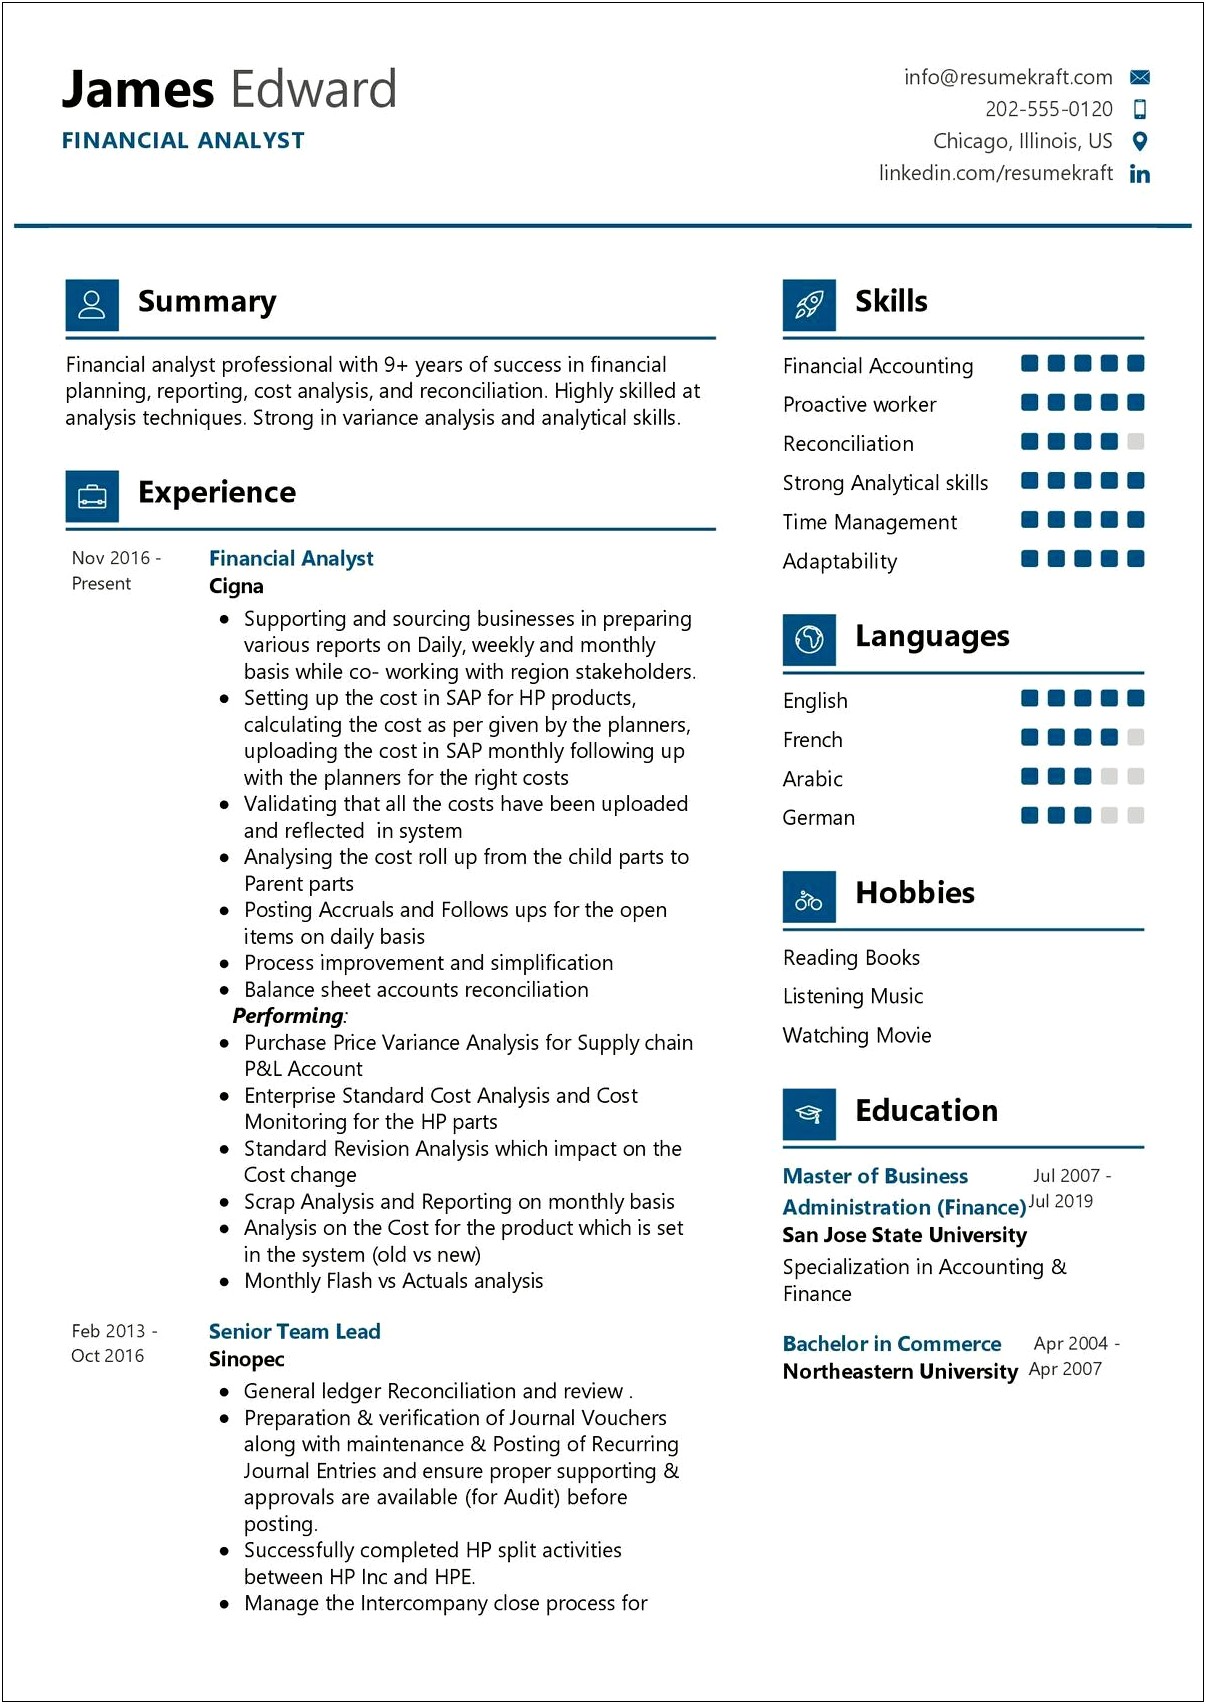 Career Objective Financial Analyst Resume Sample